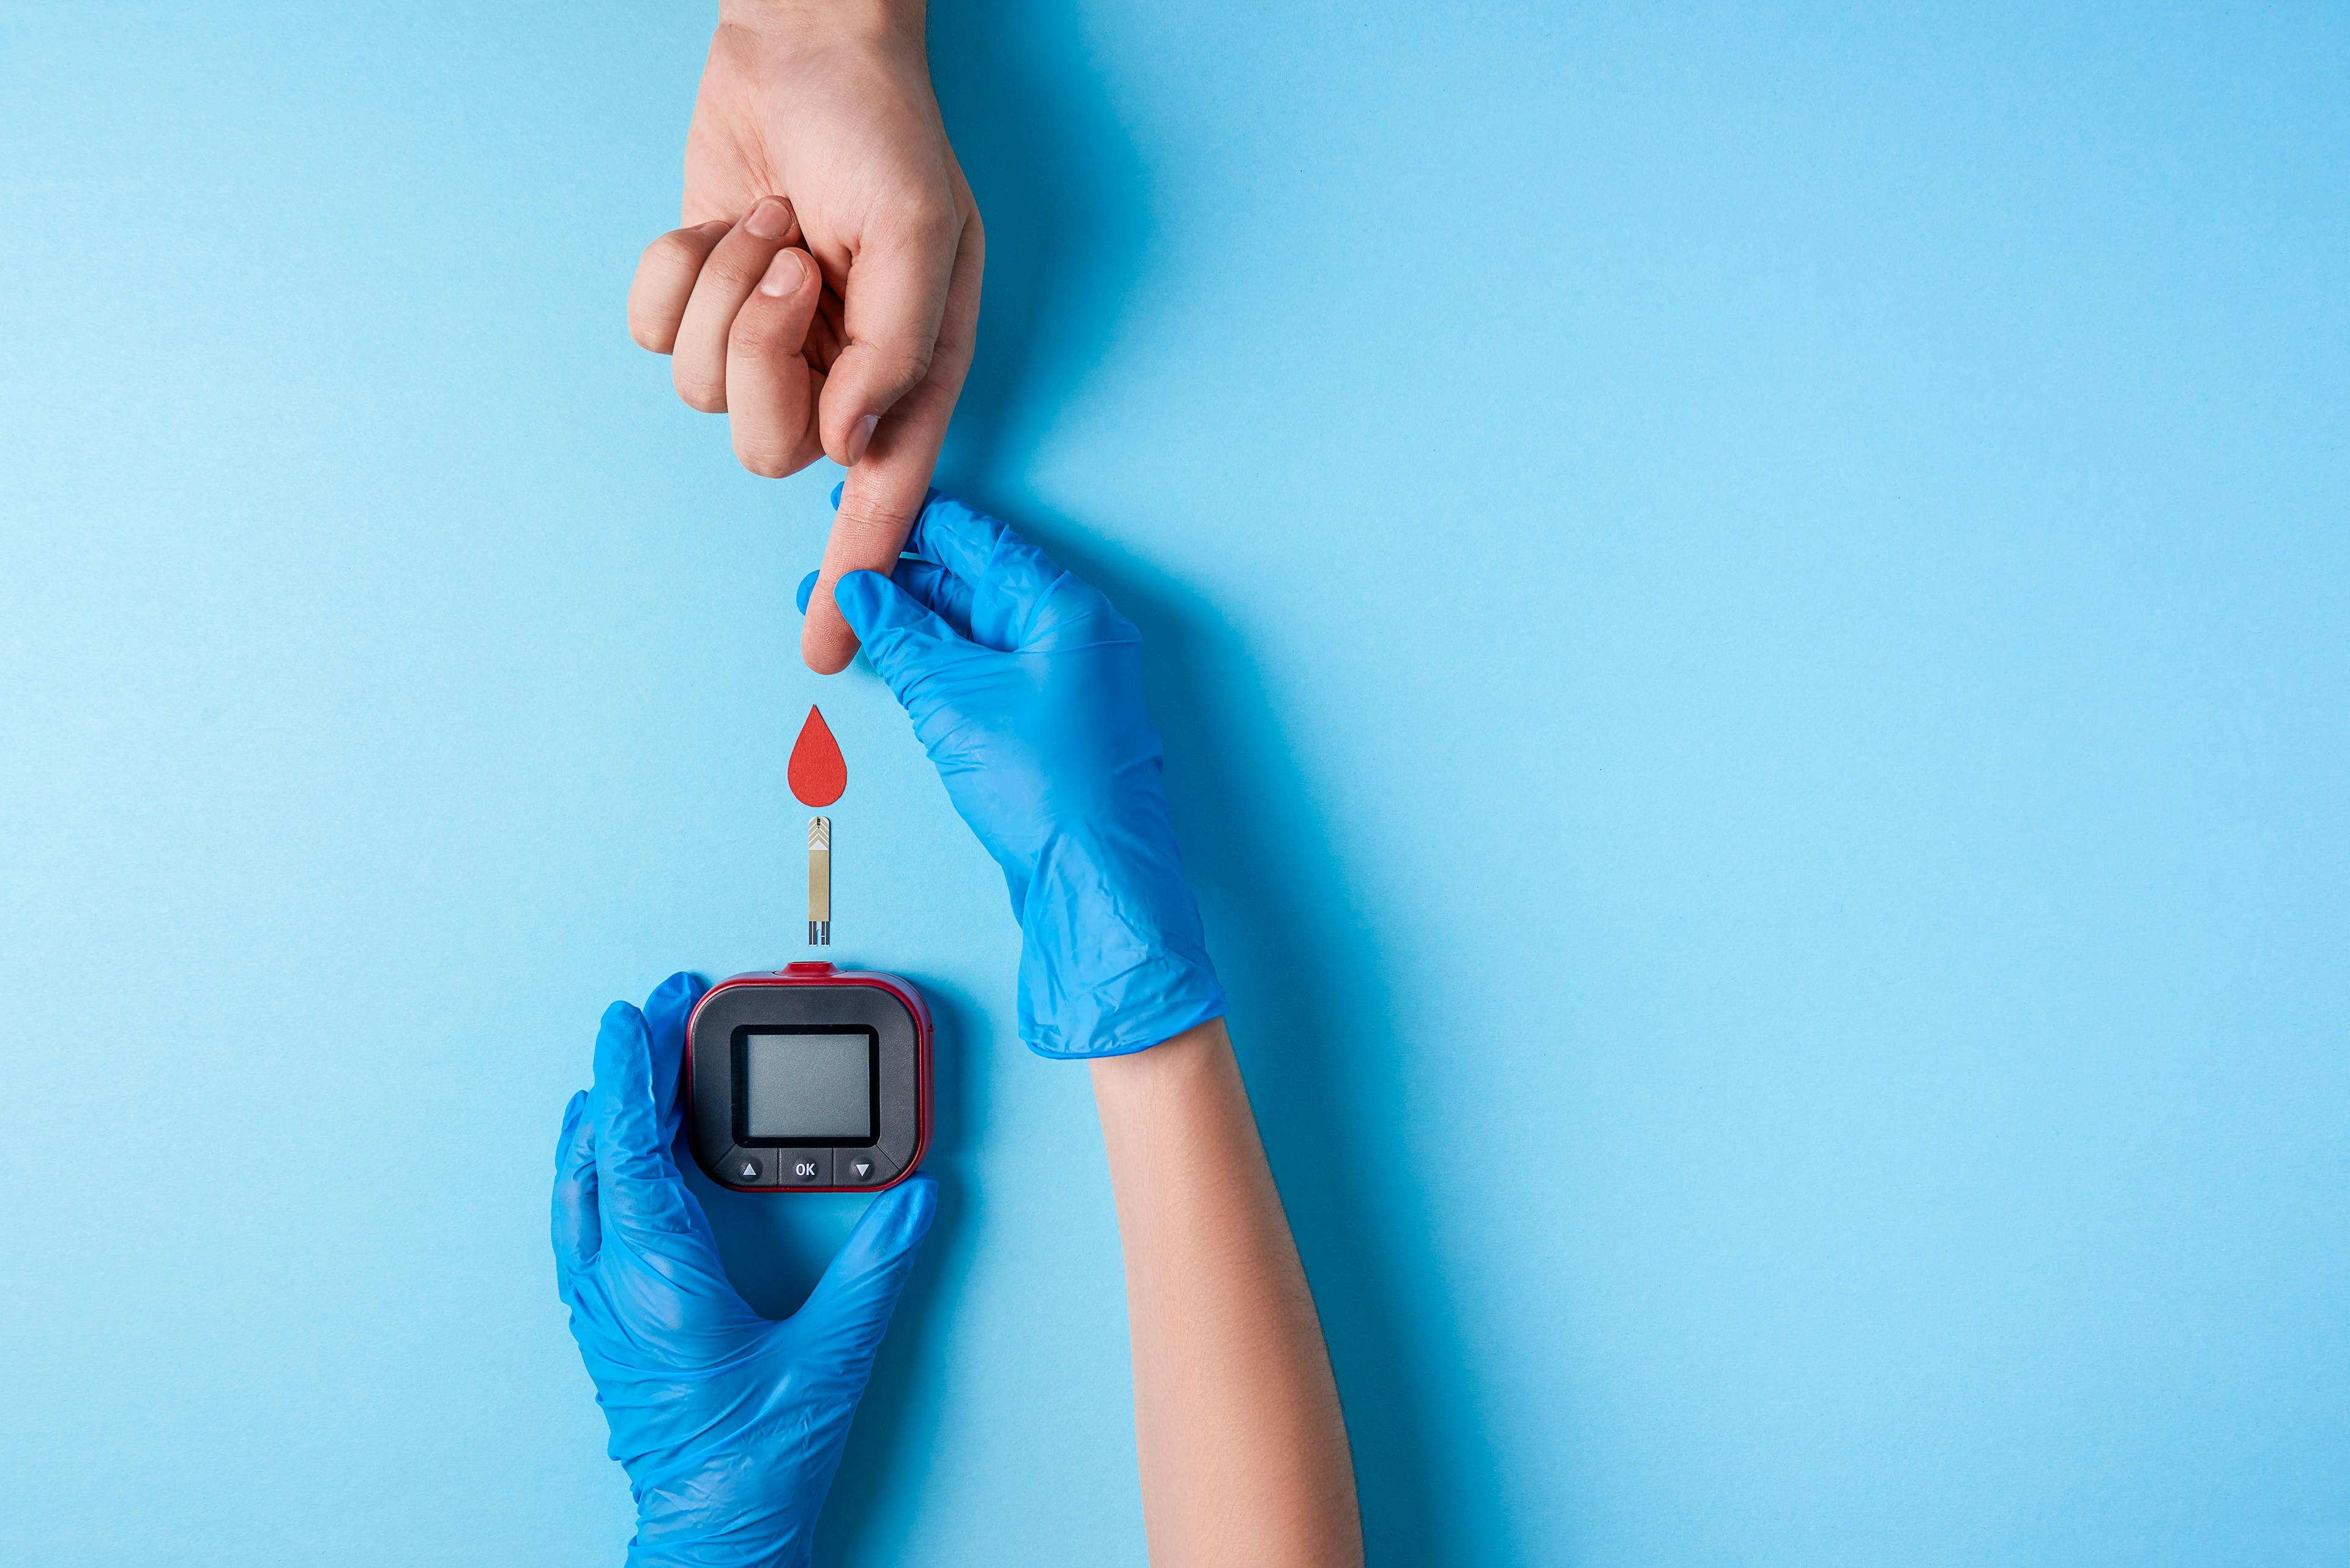 Nurse making a blood test. Man's hand with red blood drop with Blood glucose test strip and Glucose meter | Image credit: © KaterynaNovikova - © stock.adobe.com